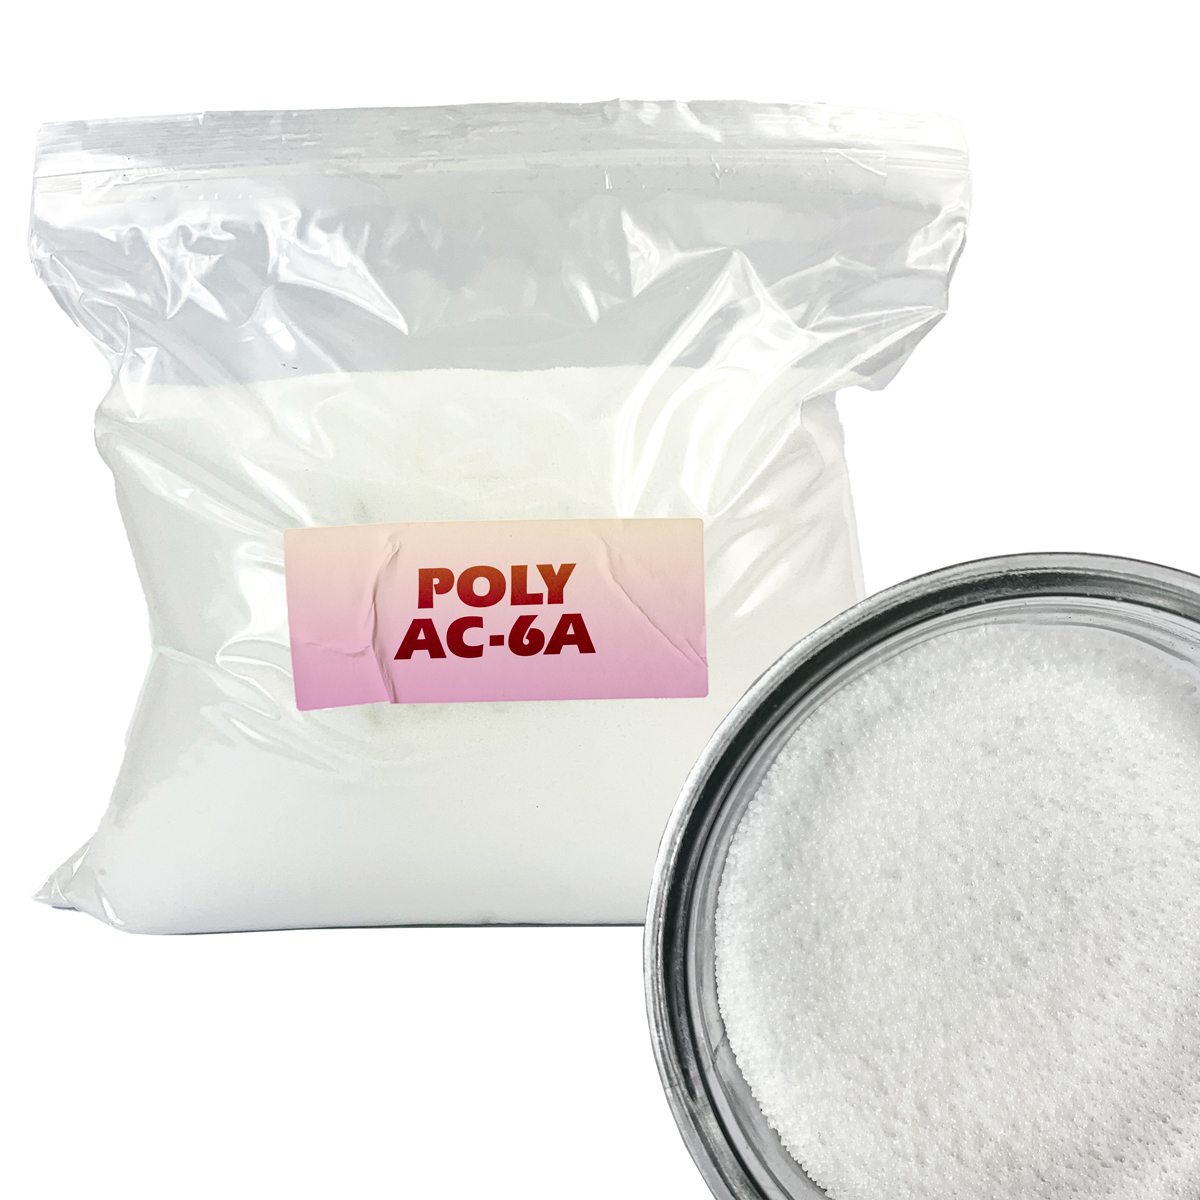 POLY AC-6A Candle Additive